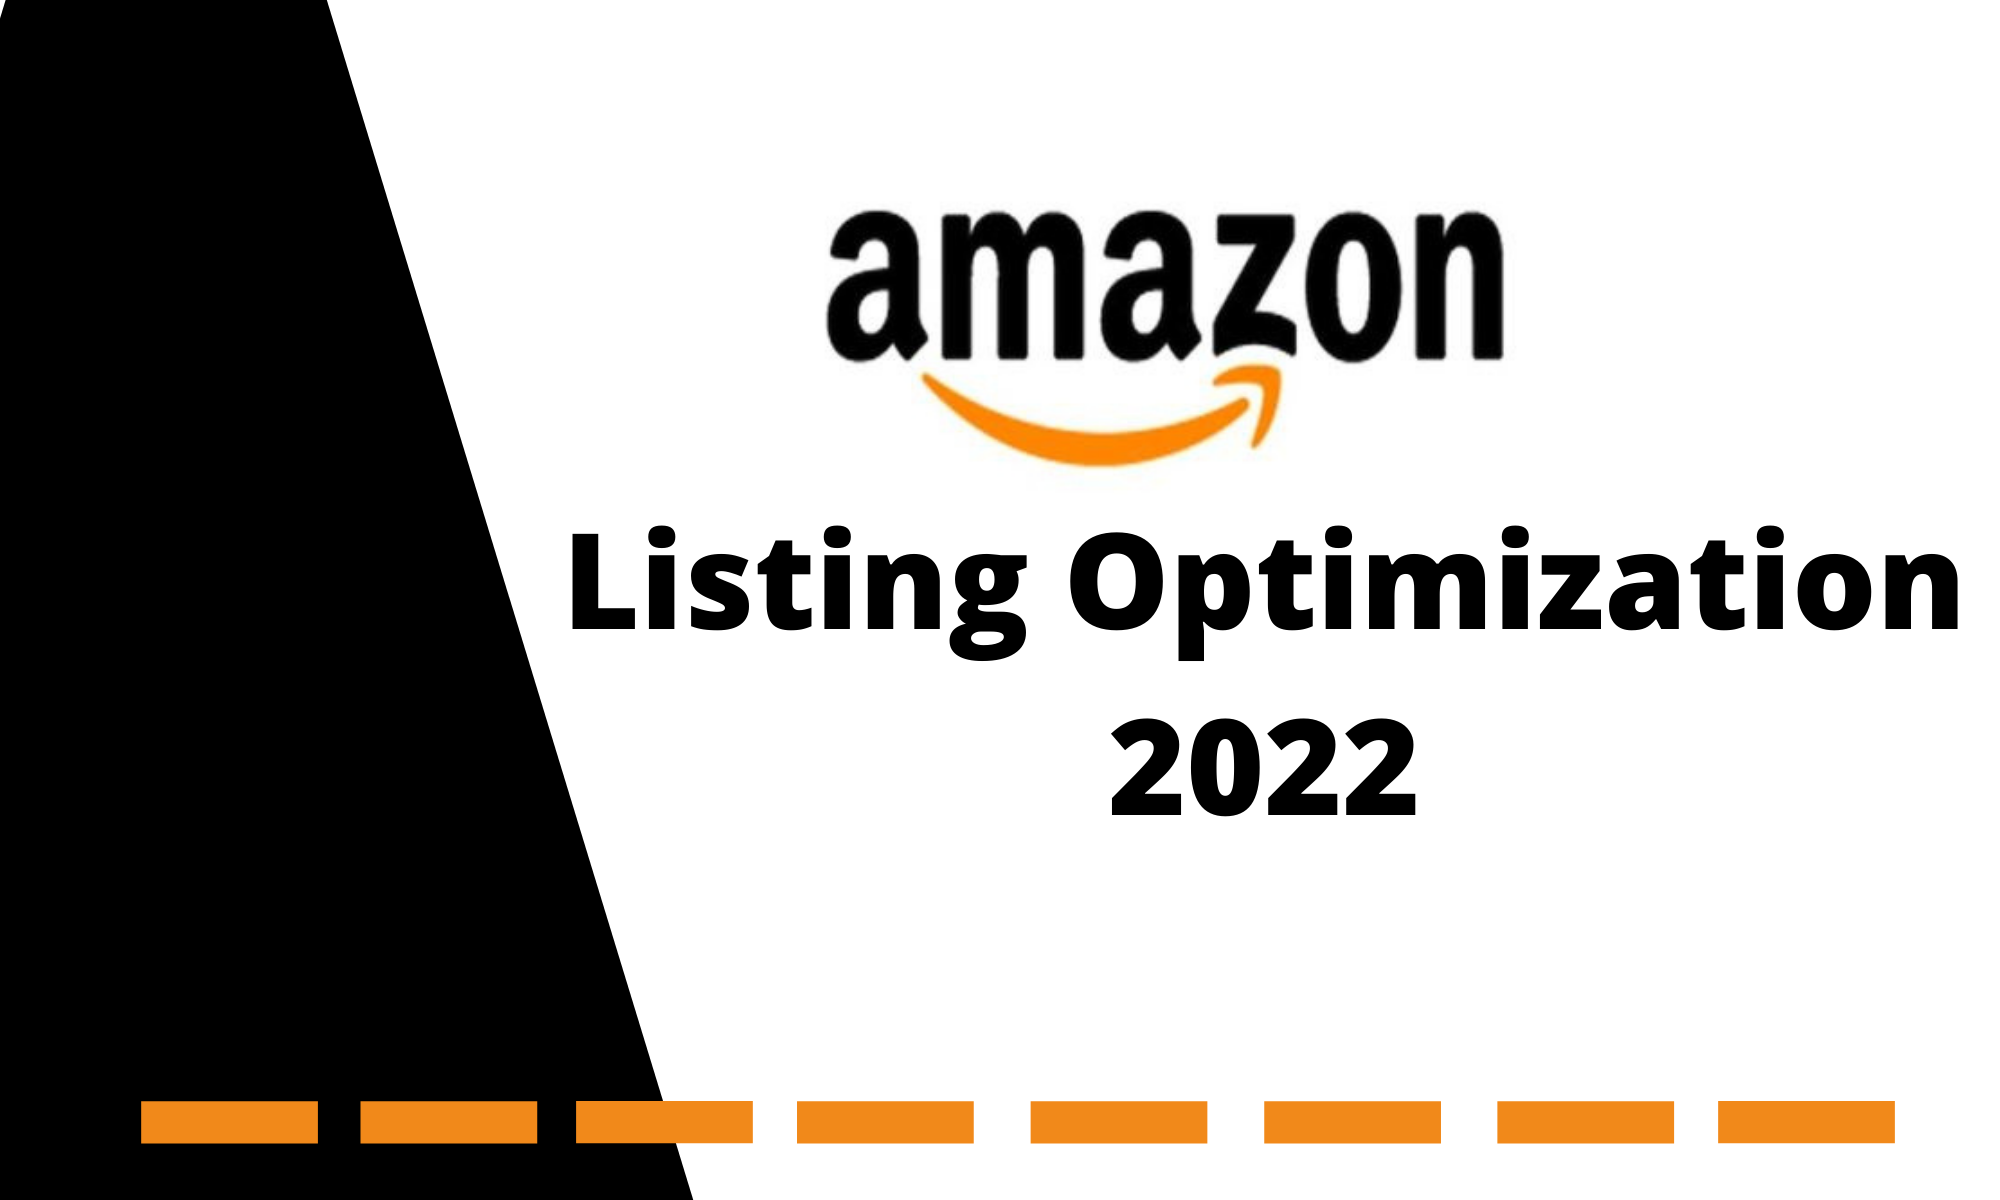 Conventional Methods for Amazon Listing Optimization 2022